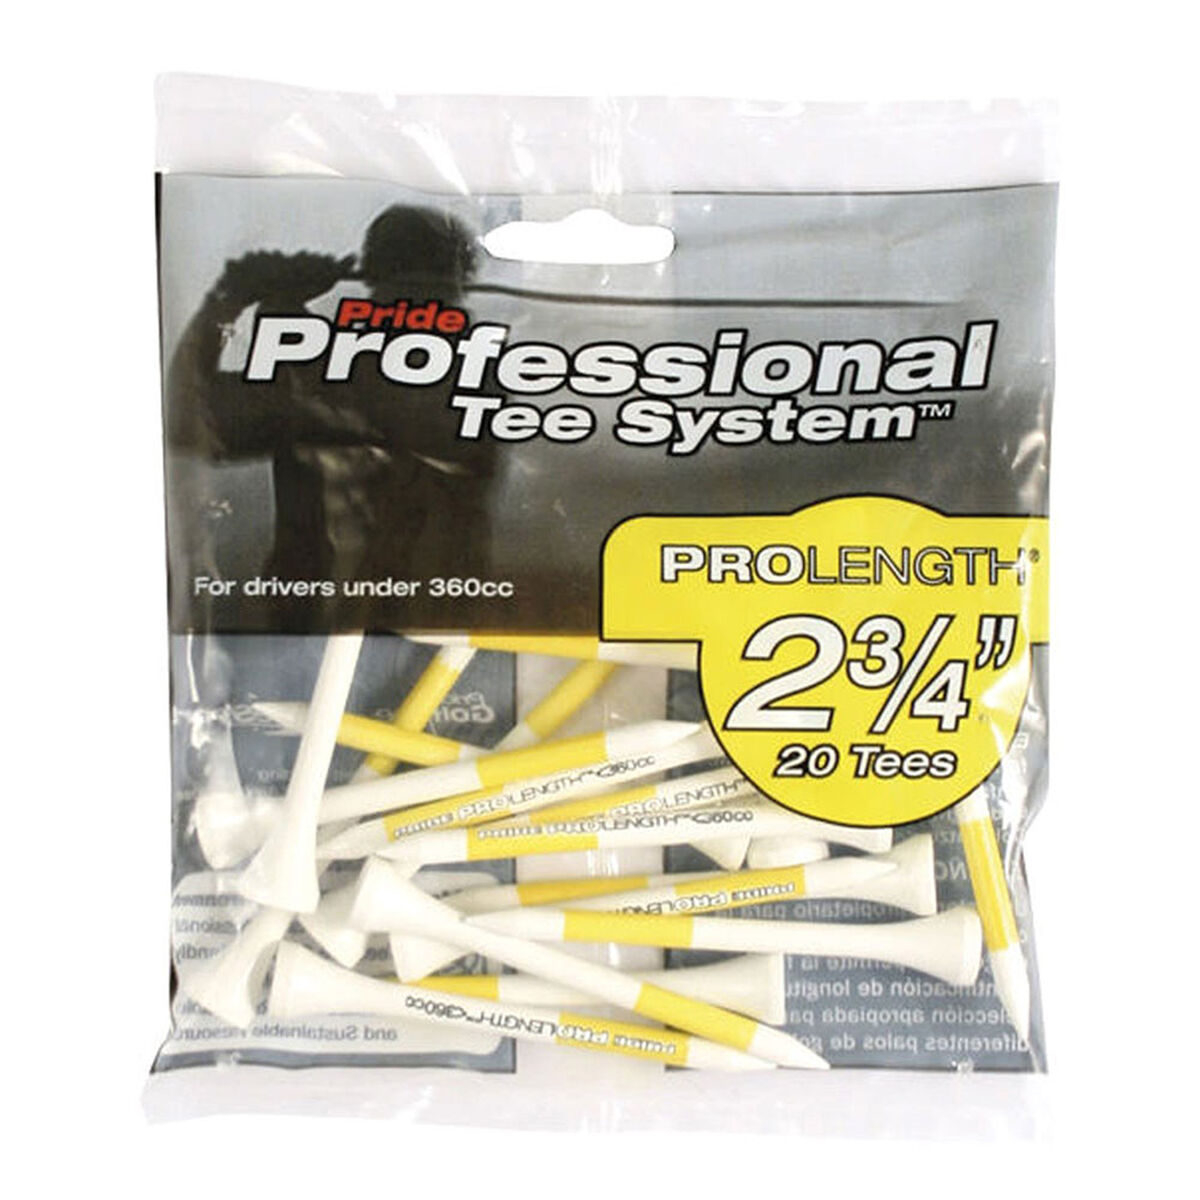 Pride Yellow and White Professional 69mm Golf Tees Small Pack, Size: 2 3/4" | American Golf, 2 3/4 Inches